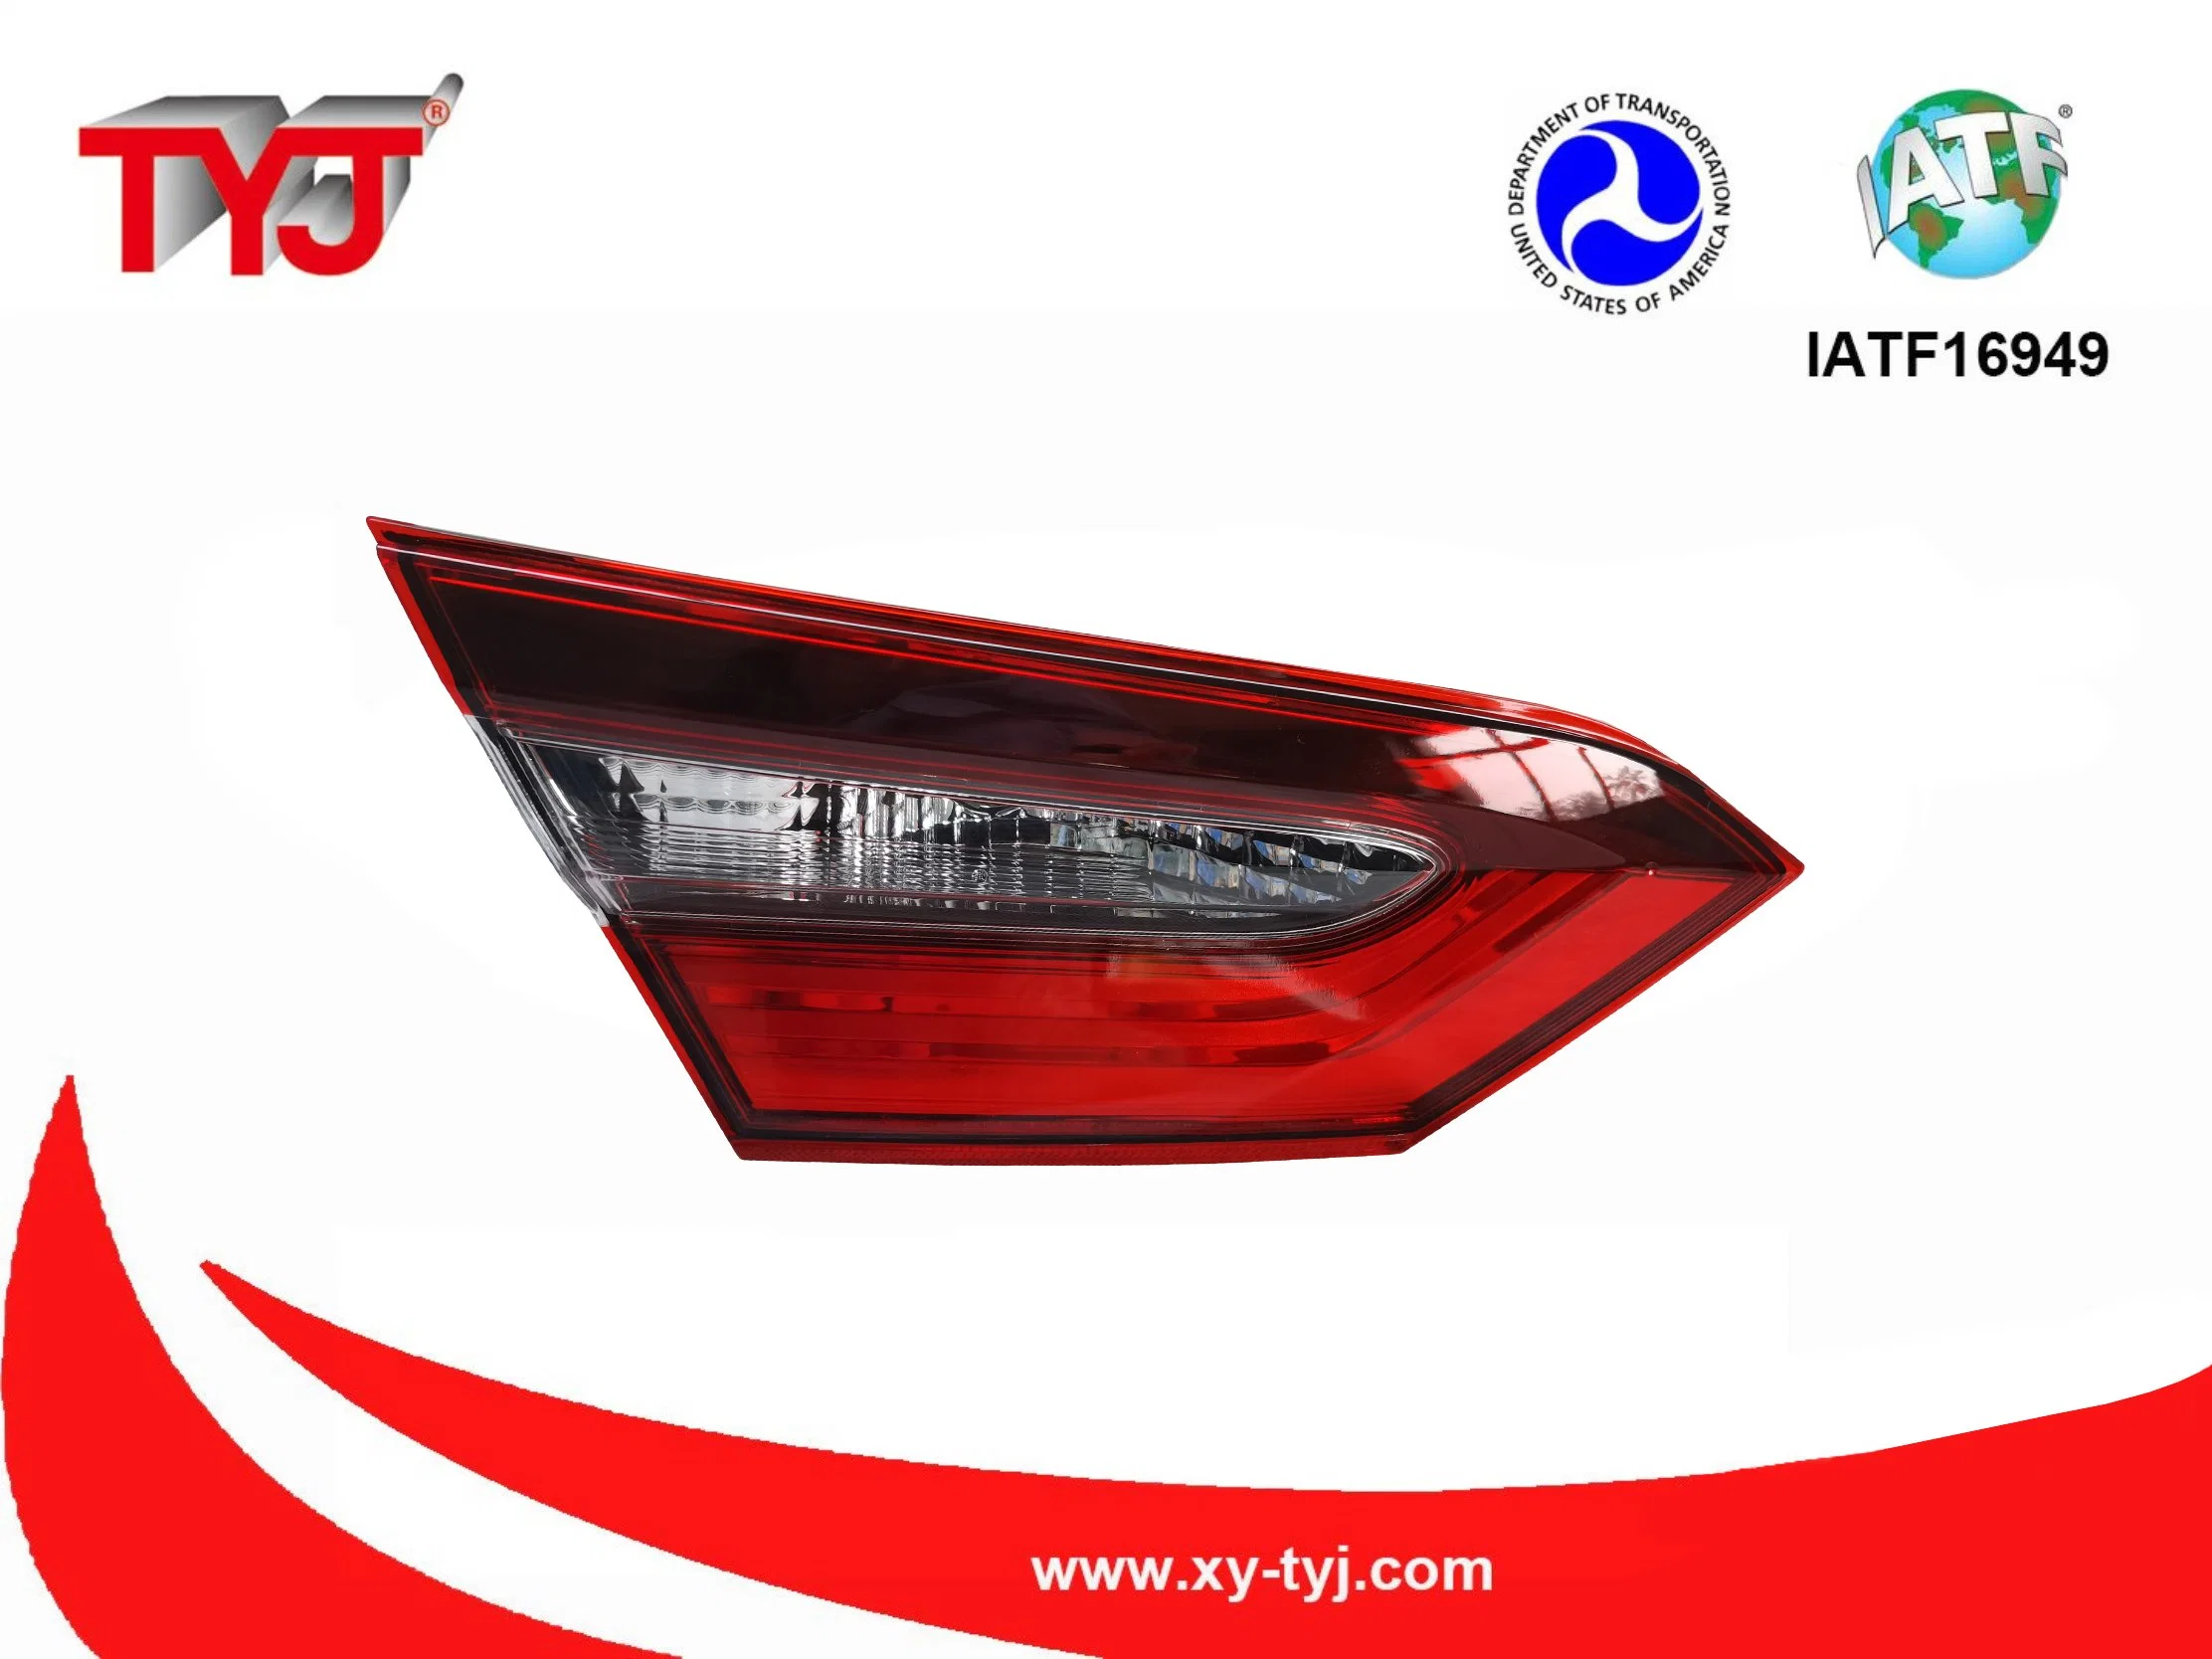 Tyj High-Quality Plug and Play Accessory Body Kit Part Car Spare Part LED Tail Light Bulb Back Lamp for Camry 2021 Se Le